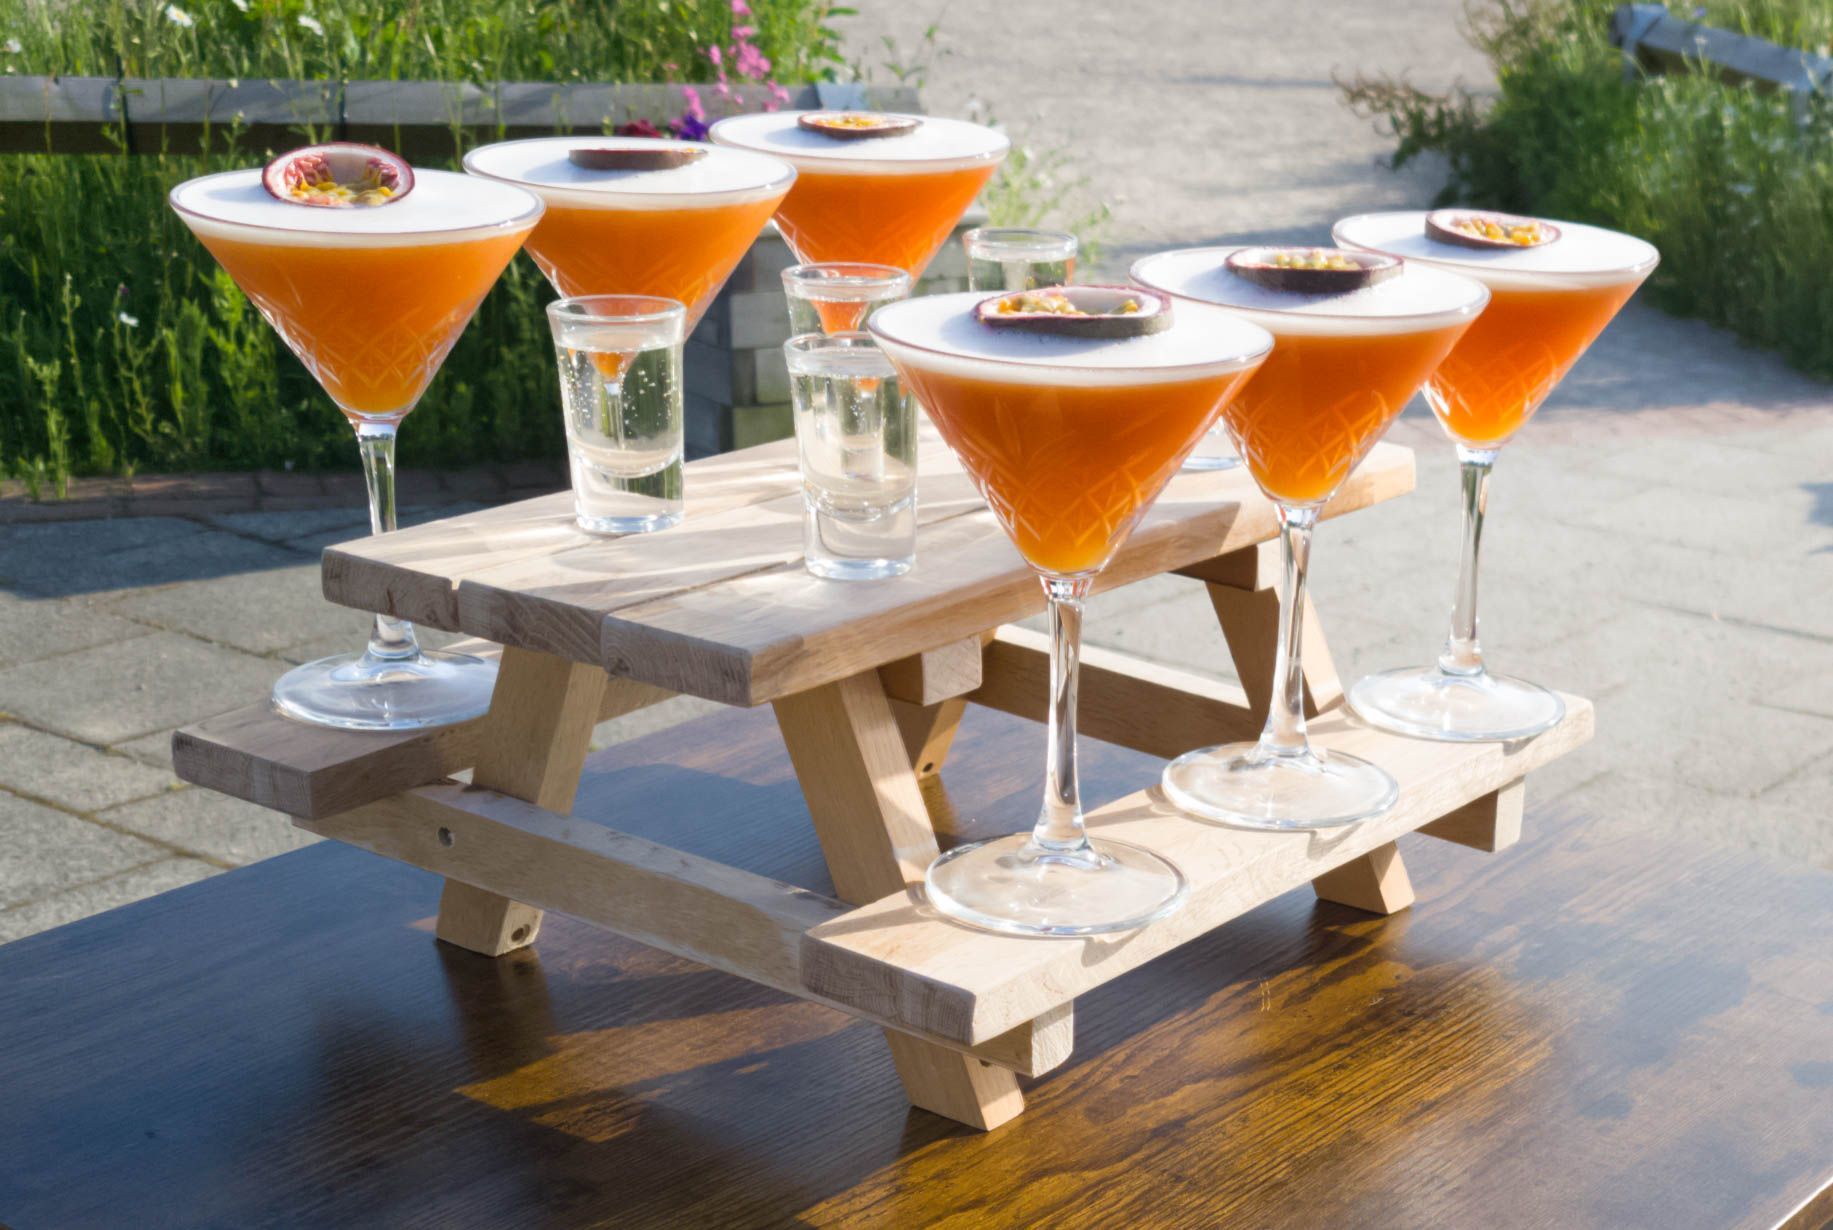 Passion fruit martinis are available on the new sharing cocktail benches